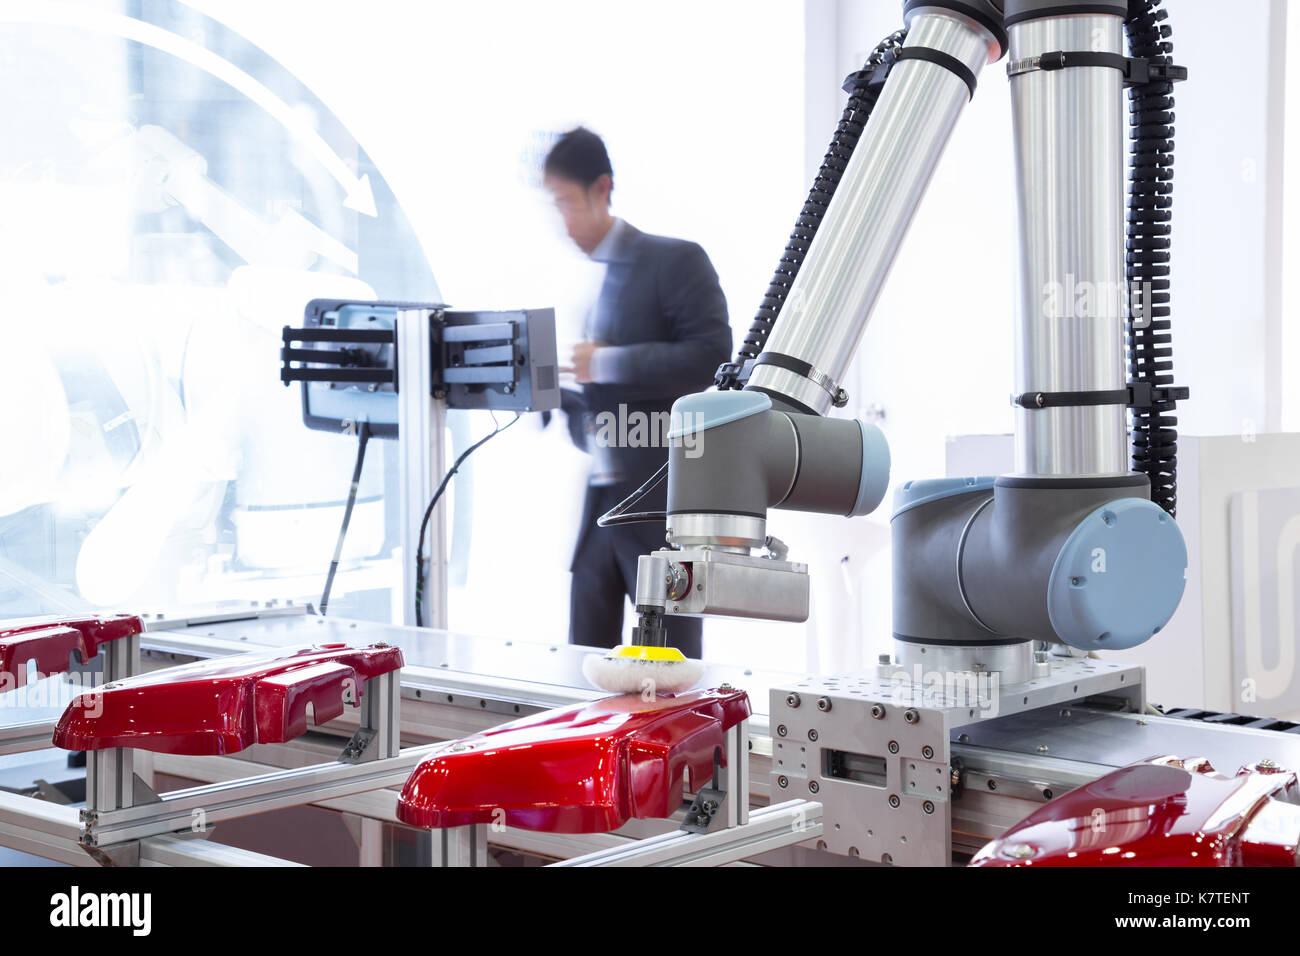 Automated robotic arm polishing automotive part in production line factory Stock Photo